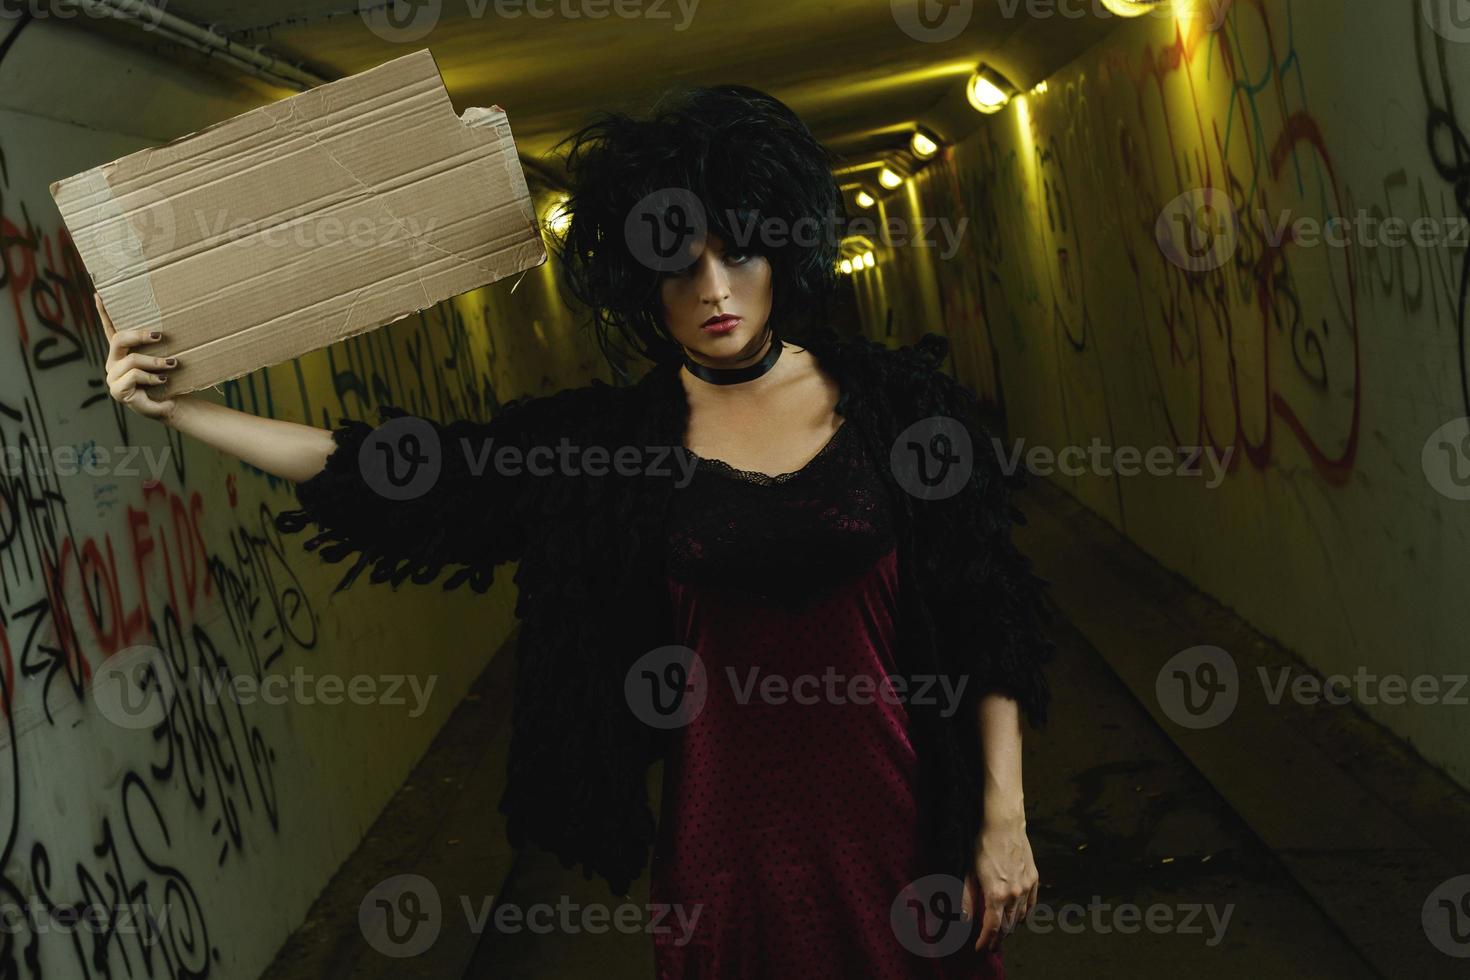 Strange and freaky woman with a piece of blank cardboard photo